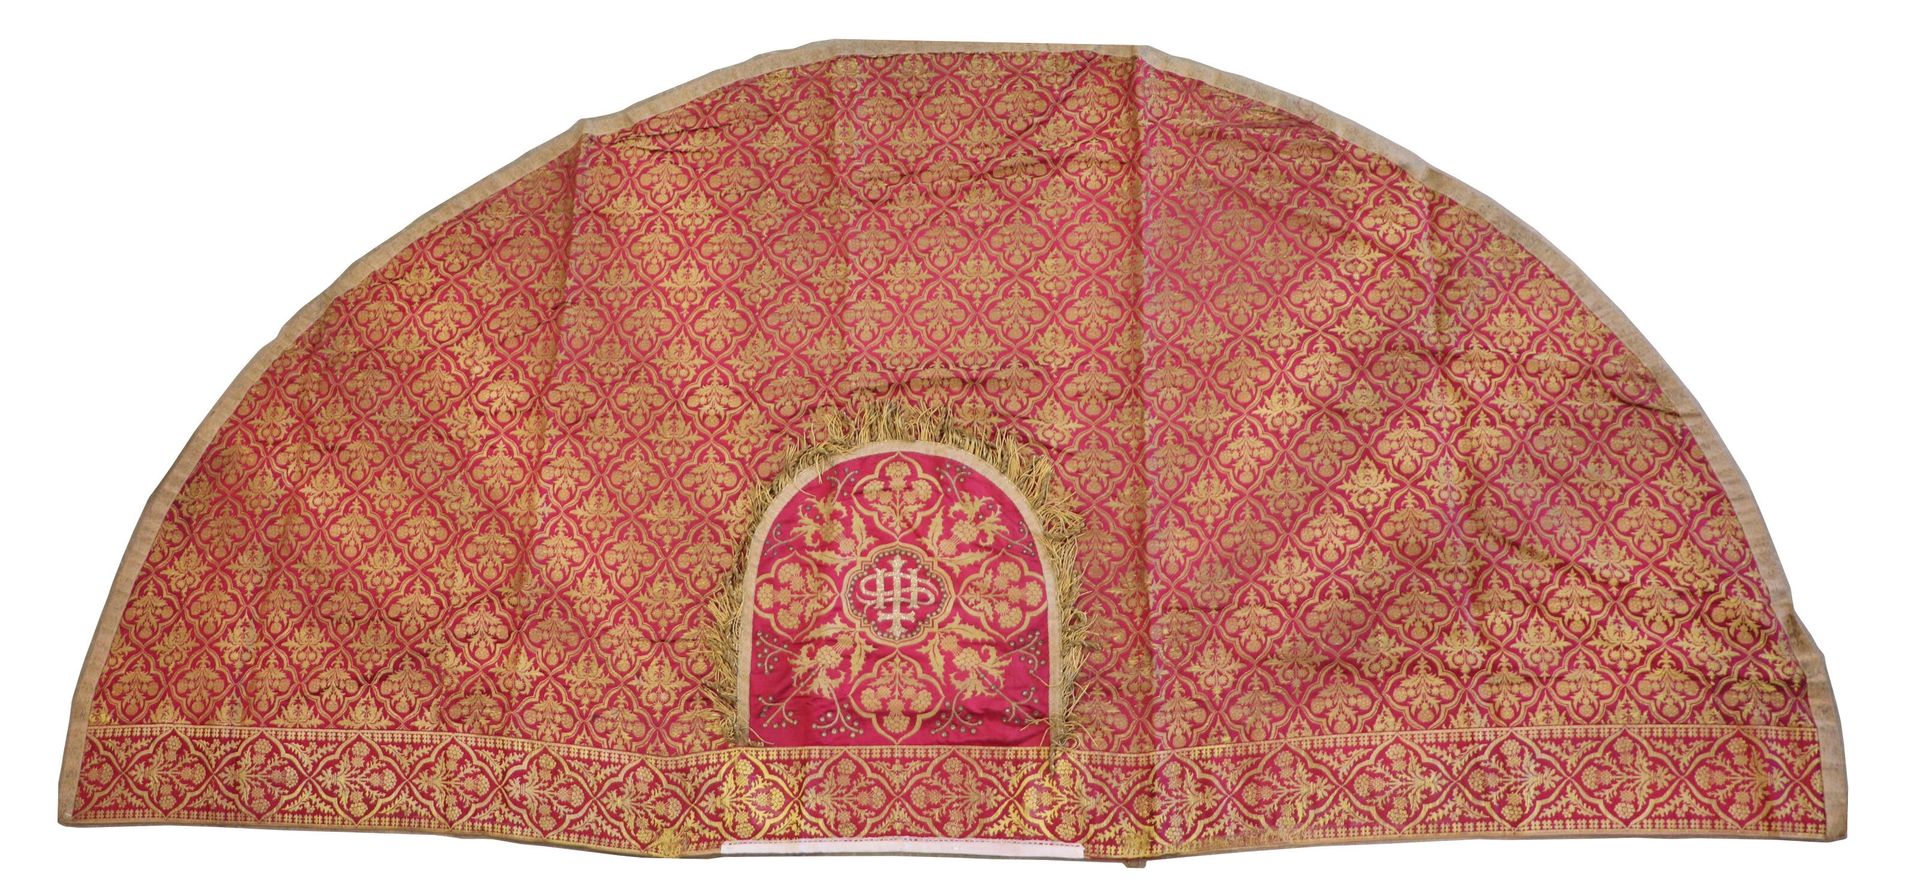 Null Chasuble cape religious red fabric with rich gold embroidered foliage compa&hellip;